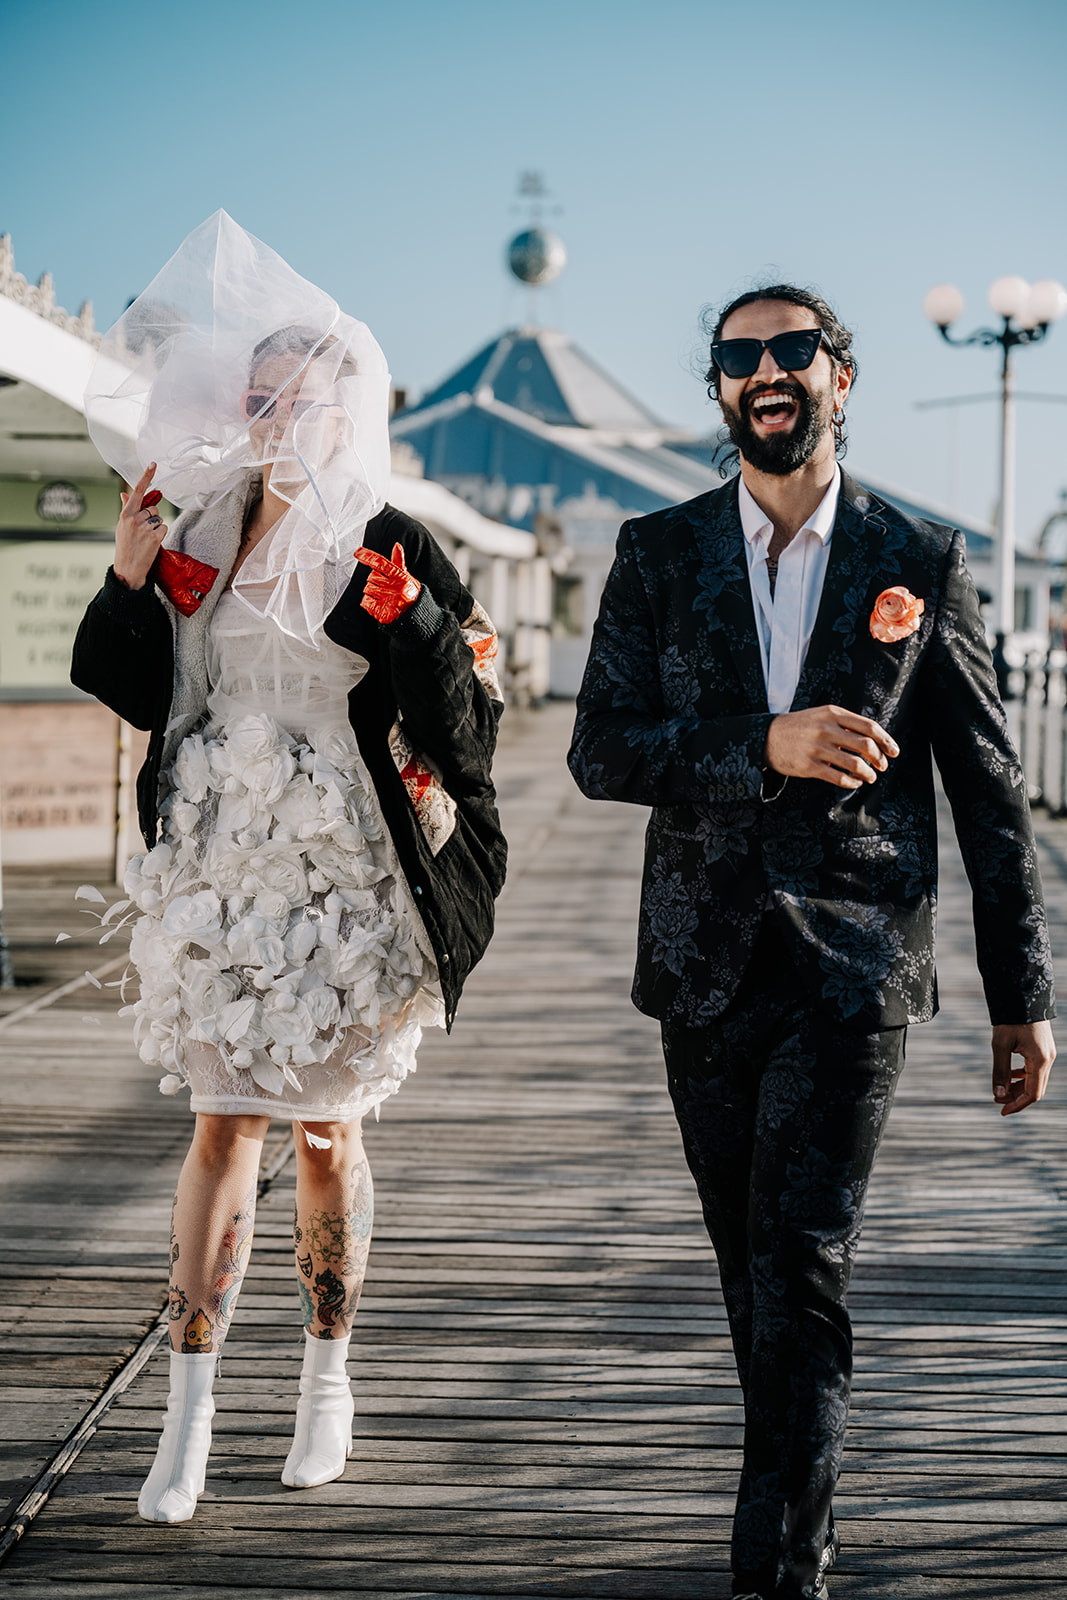 A married couple walking along the pier with the bride's veil blowing in her face